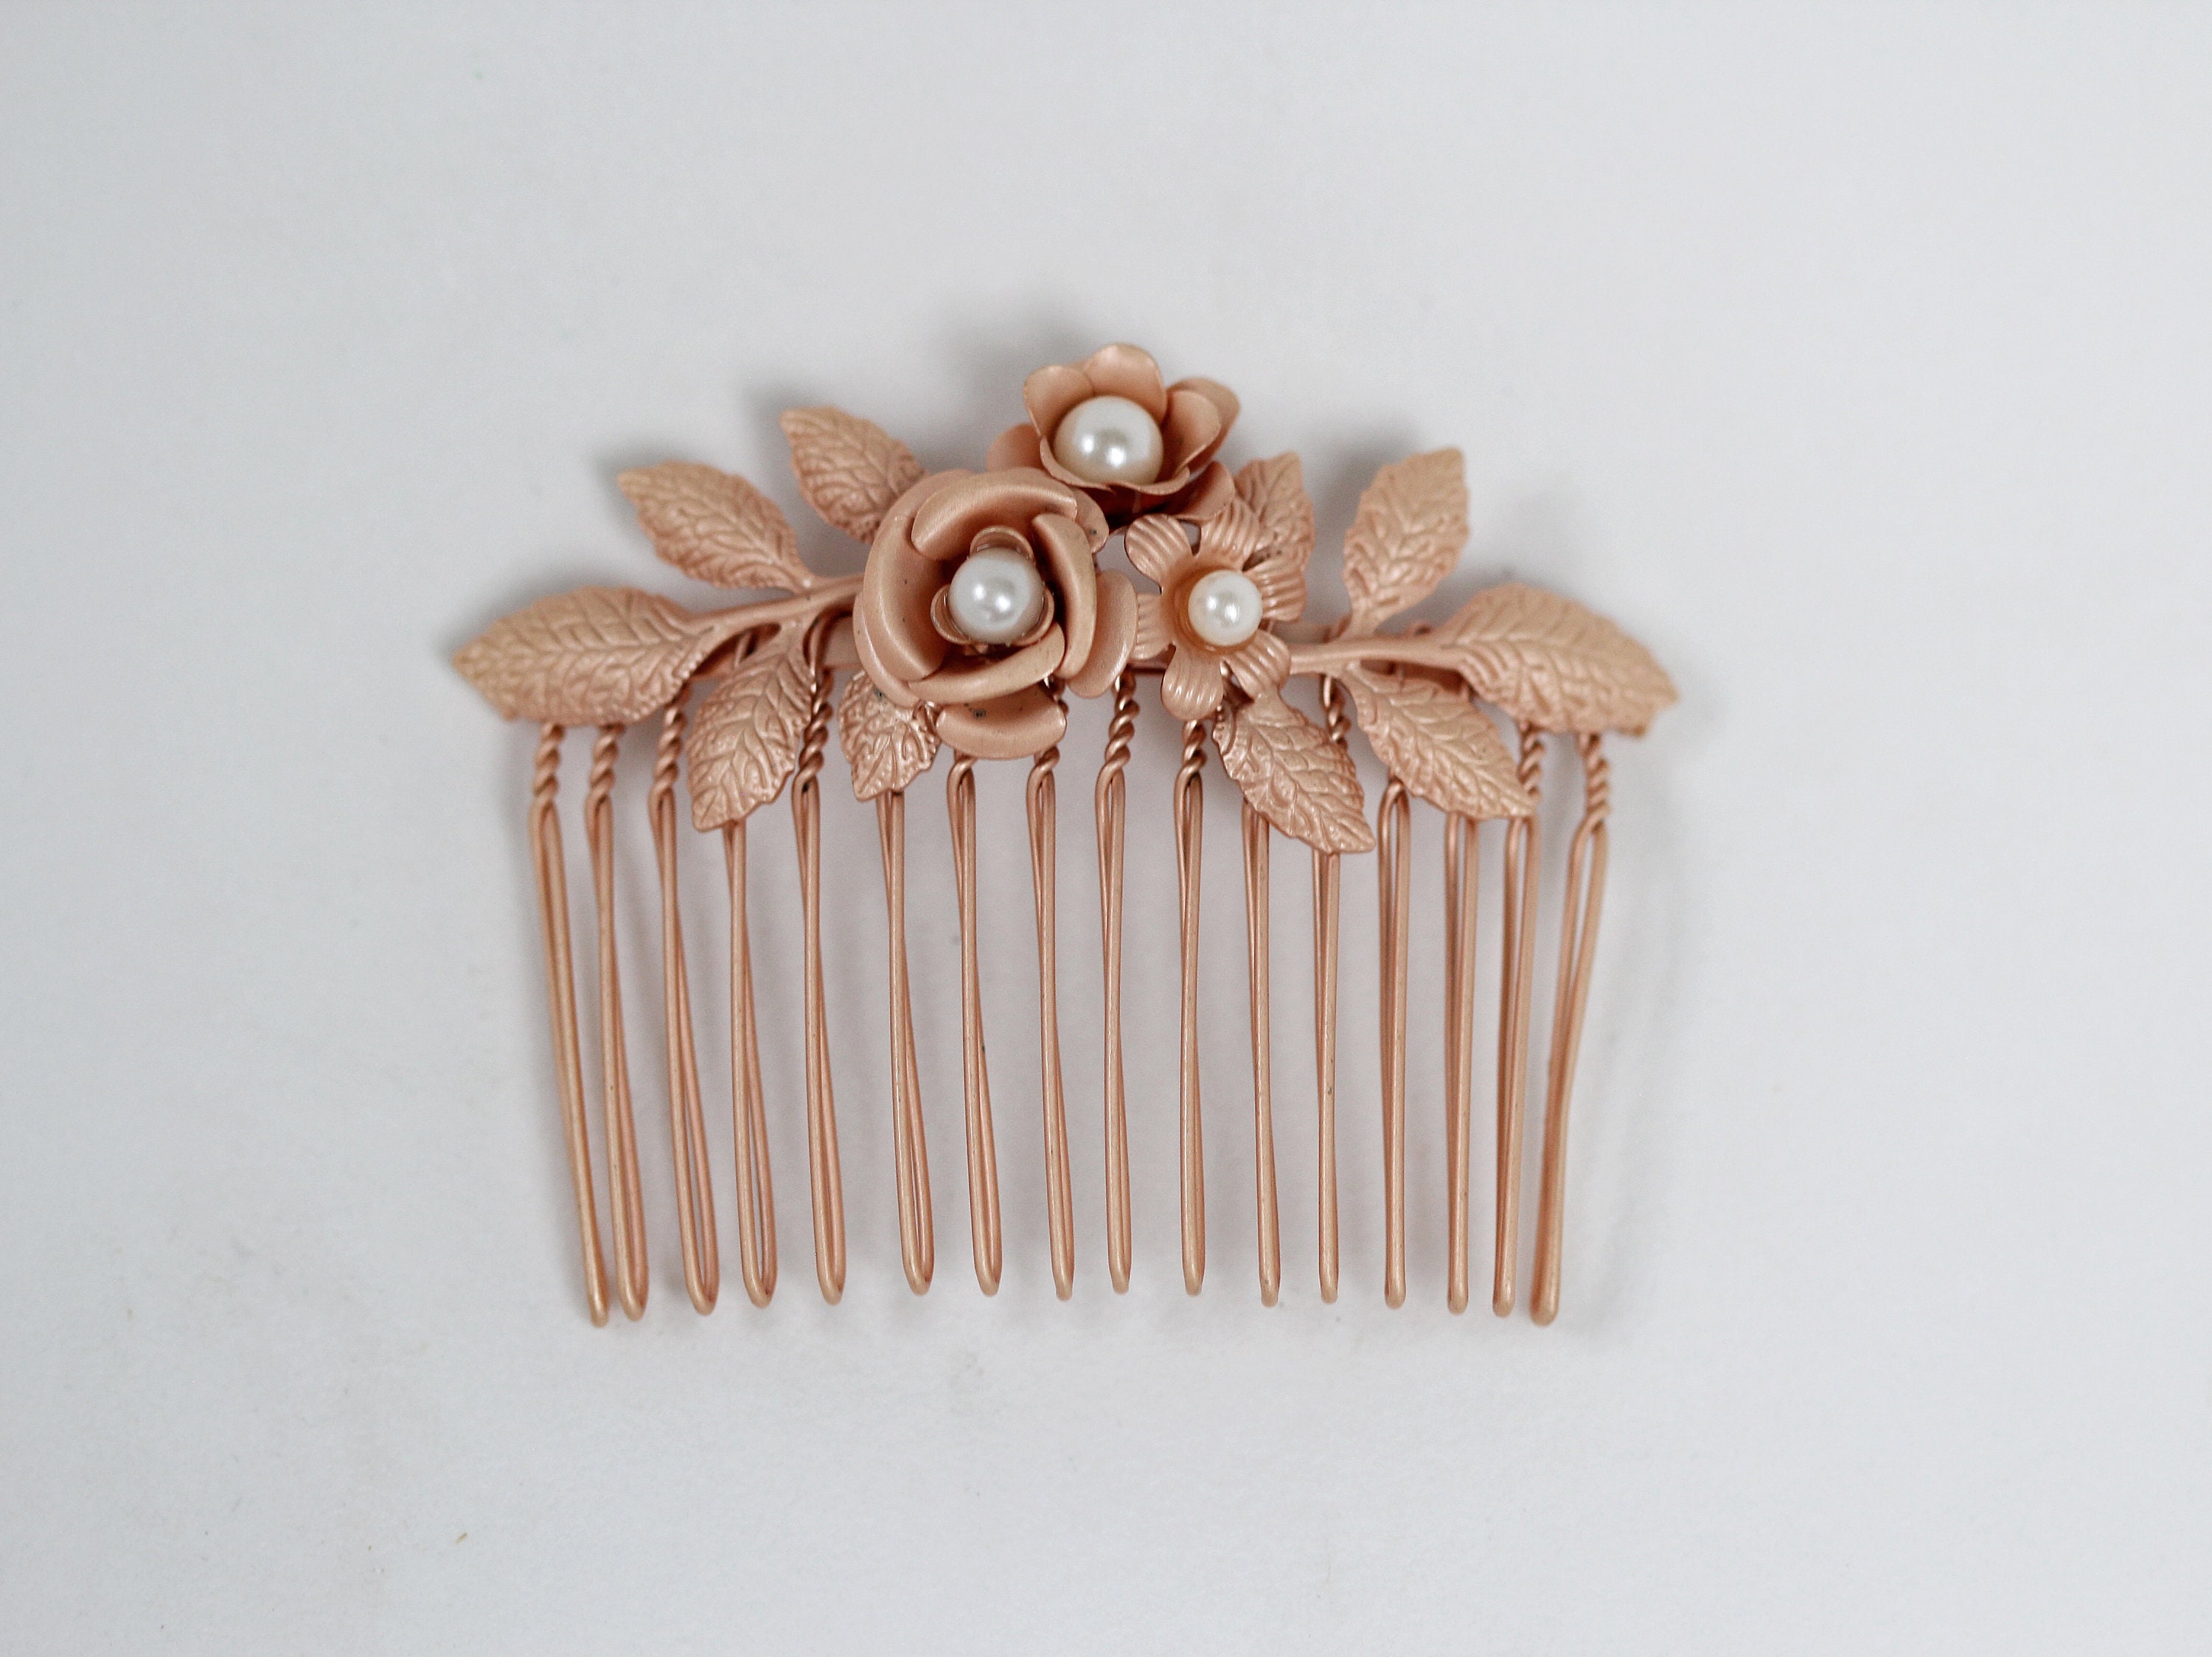 Discounted Version Blooming Roses Amber Comb Gold Boho Floral - Etsy